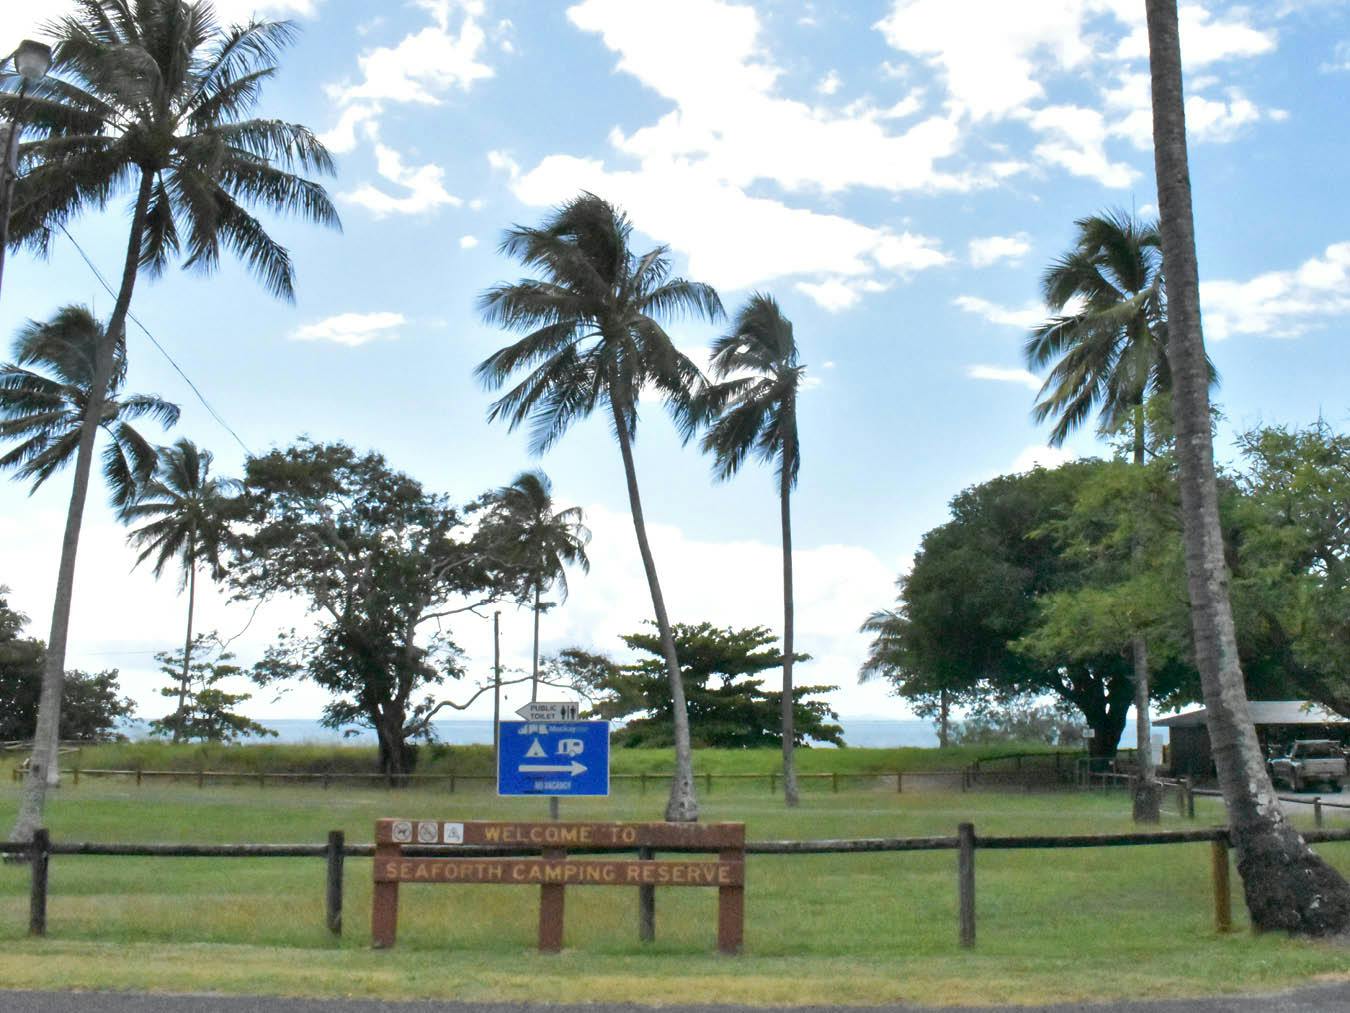 Intersection 1 – Seaforth Esplanade Road. This photograph is looking north from the intersection towards the beach.  